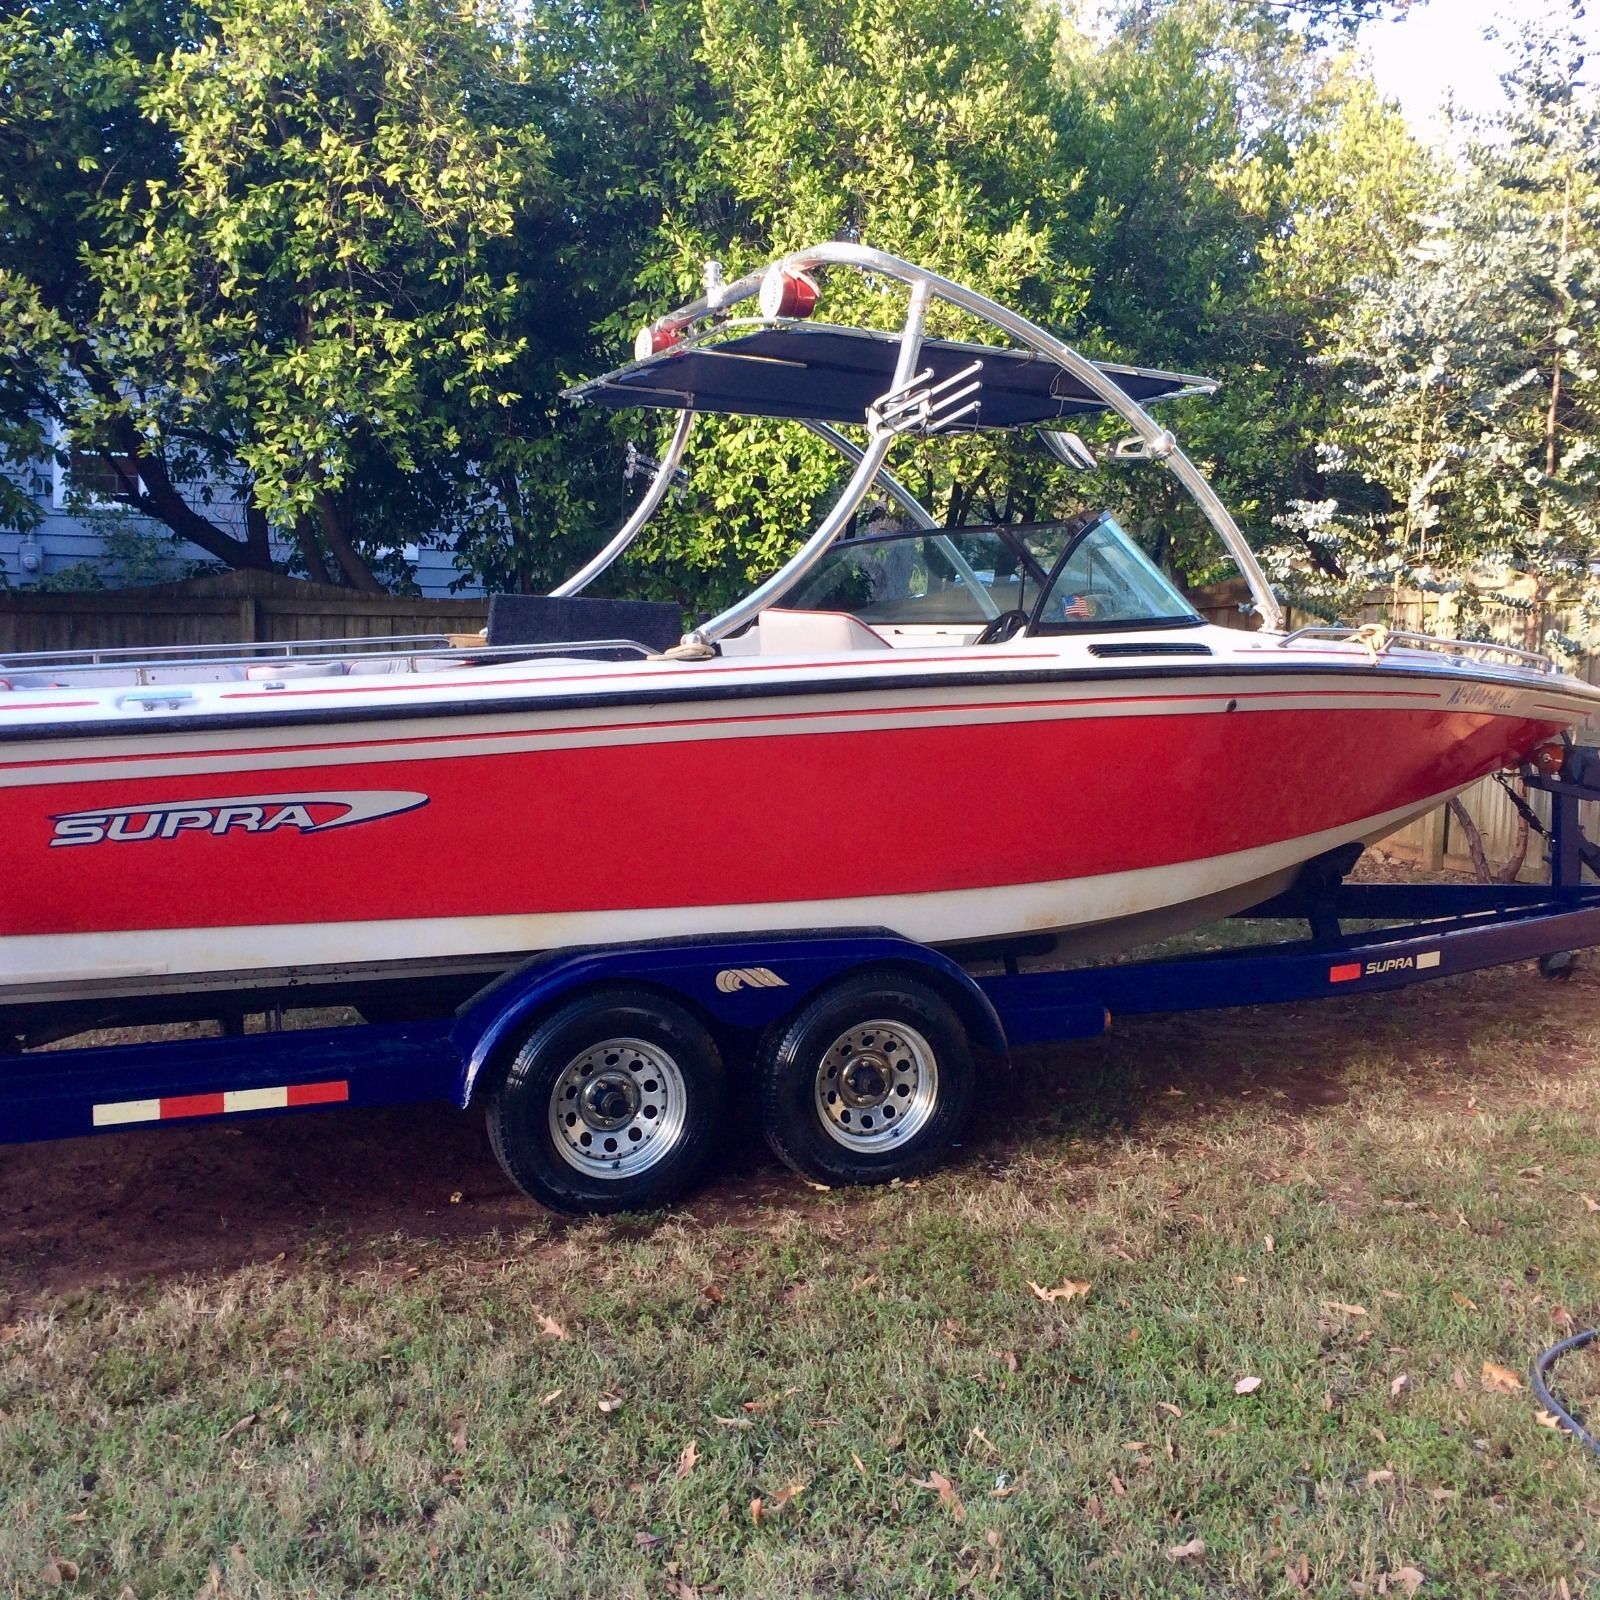 Supra Saltare 1995 for sale for $12,999 - Boats-from-USA.com